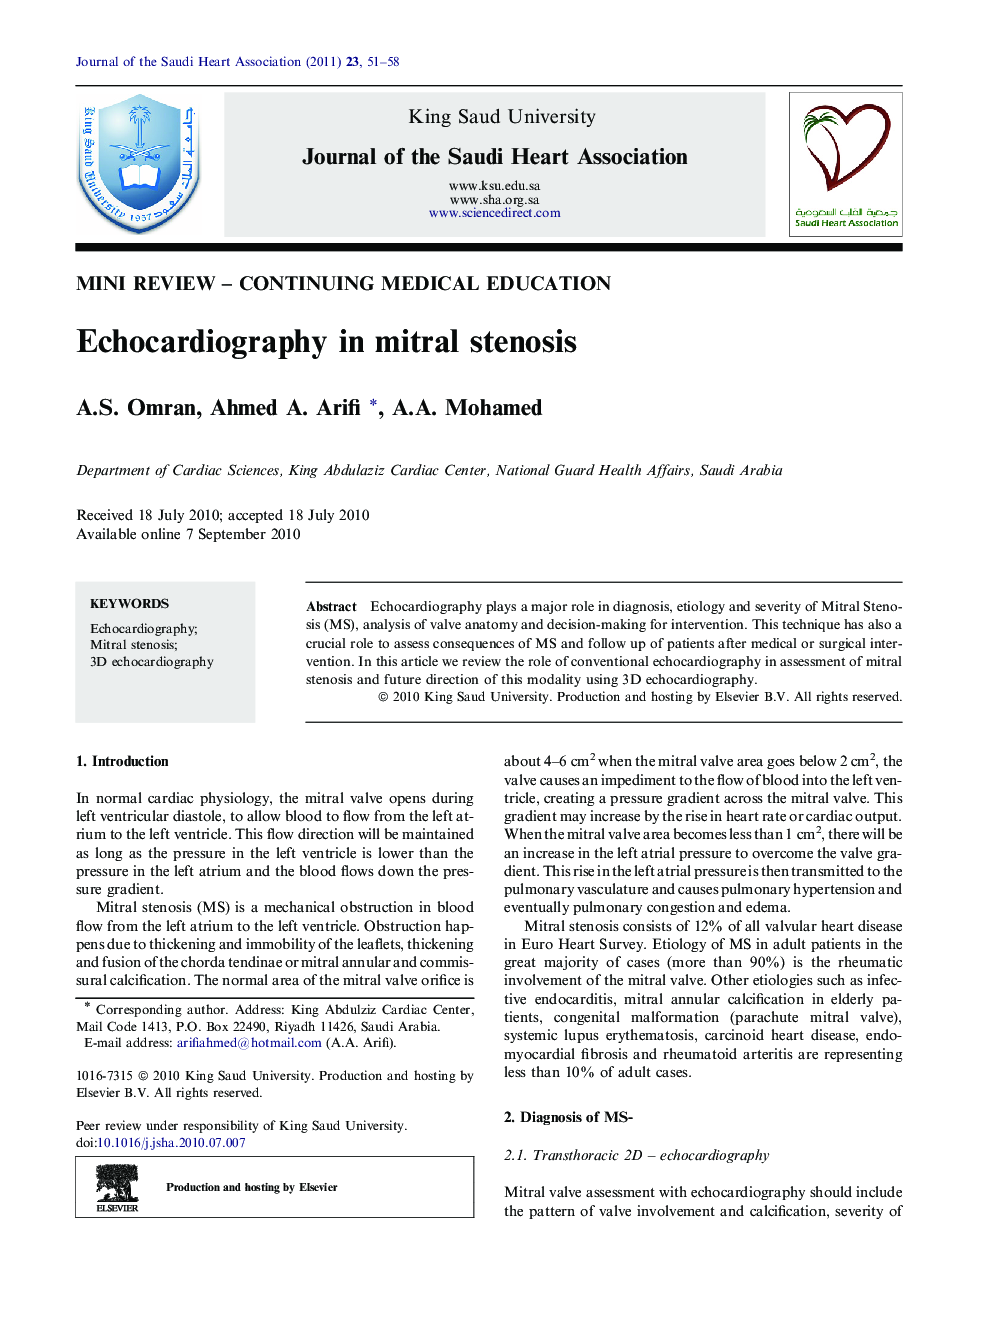 Echocardiography in mitral stenosis